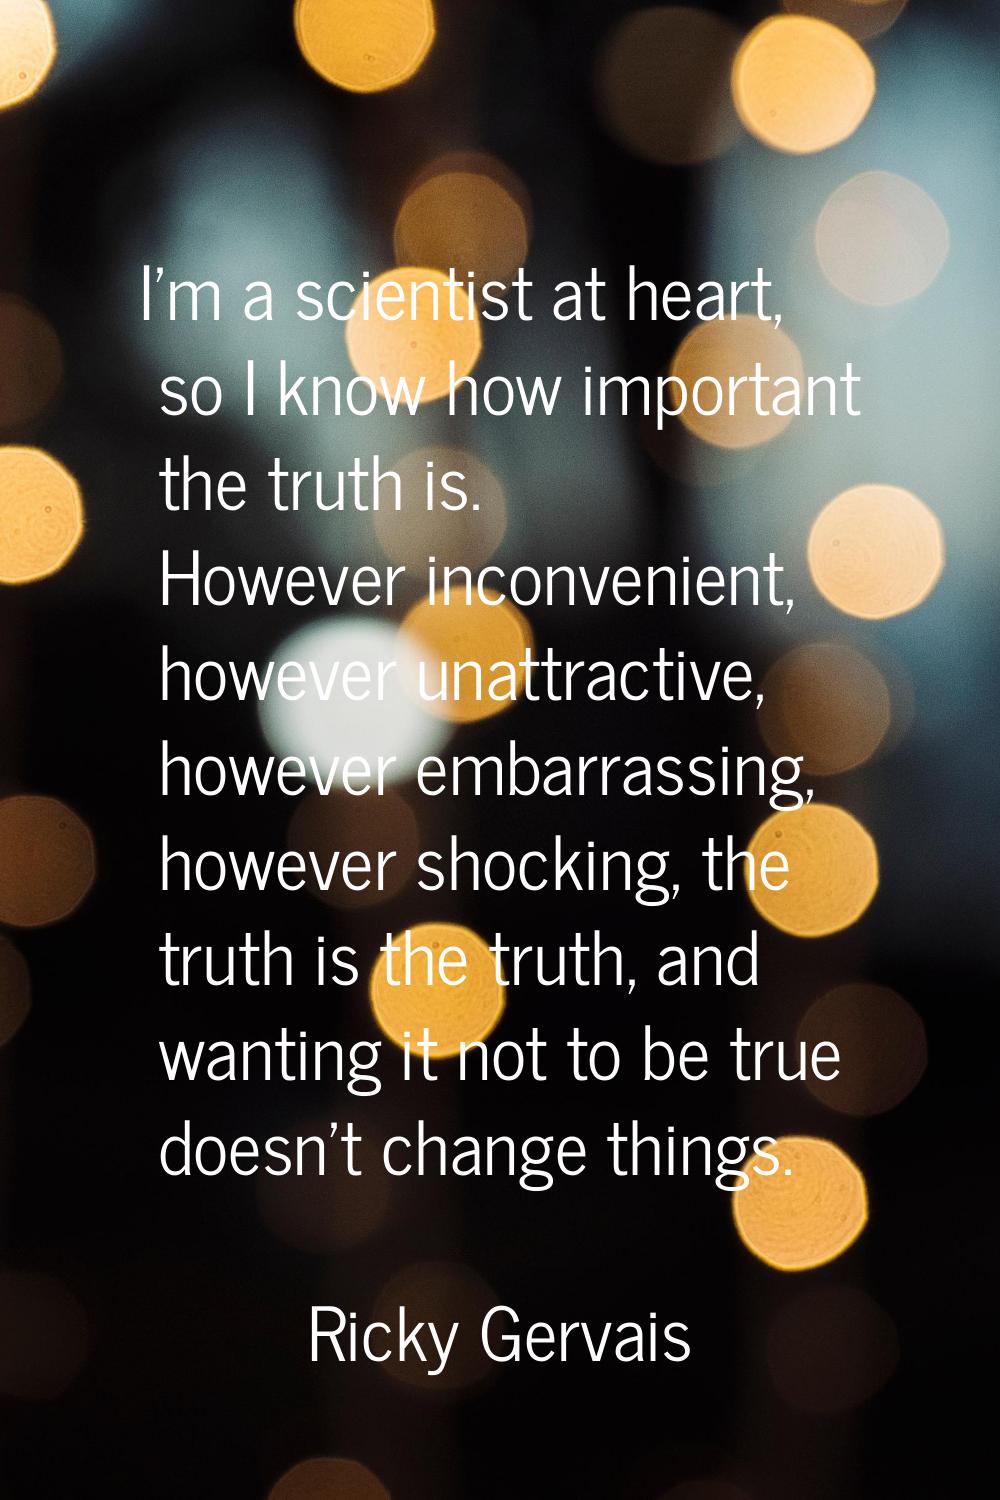 I'm a scientist at heart, so I know how important the truth is. However inconvenient, however unatt